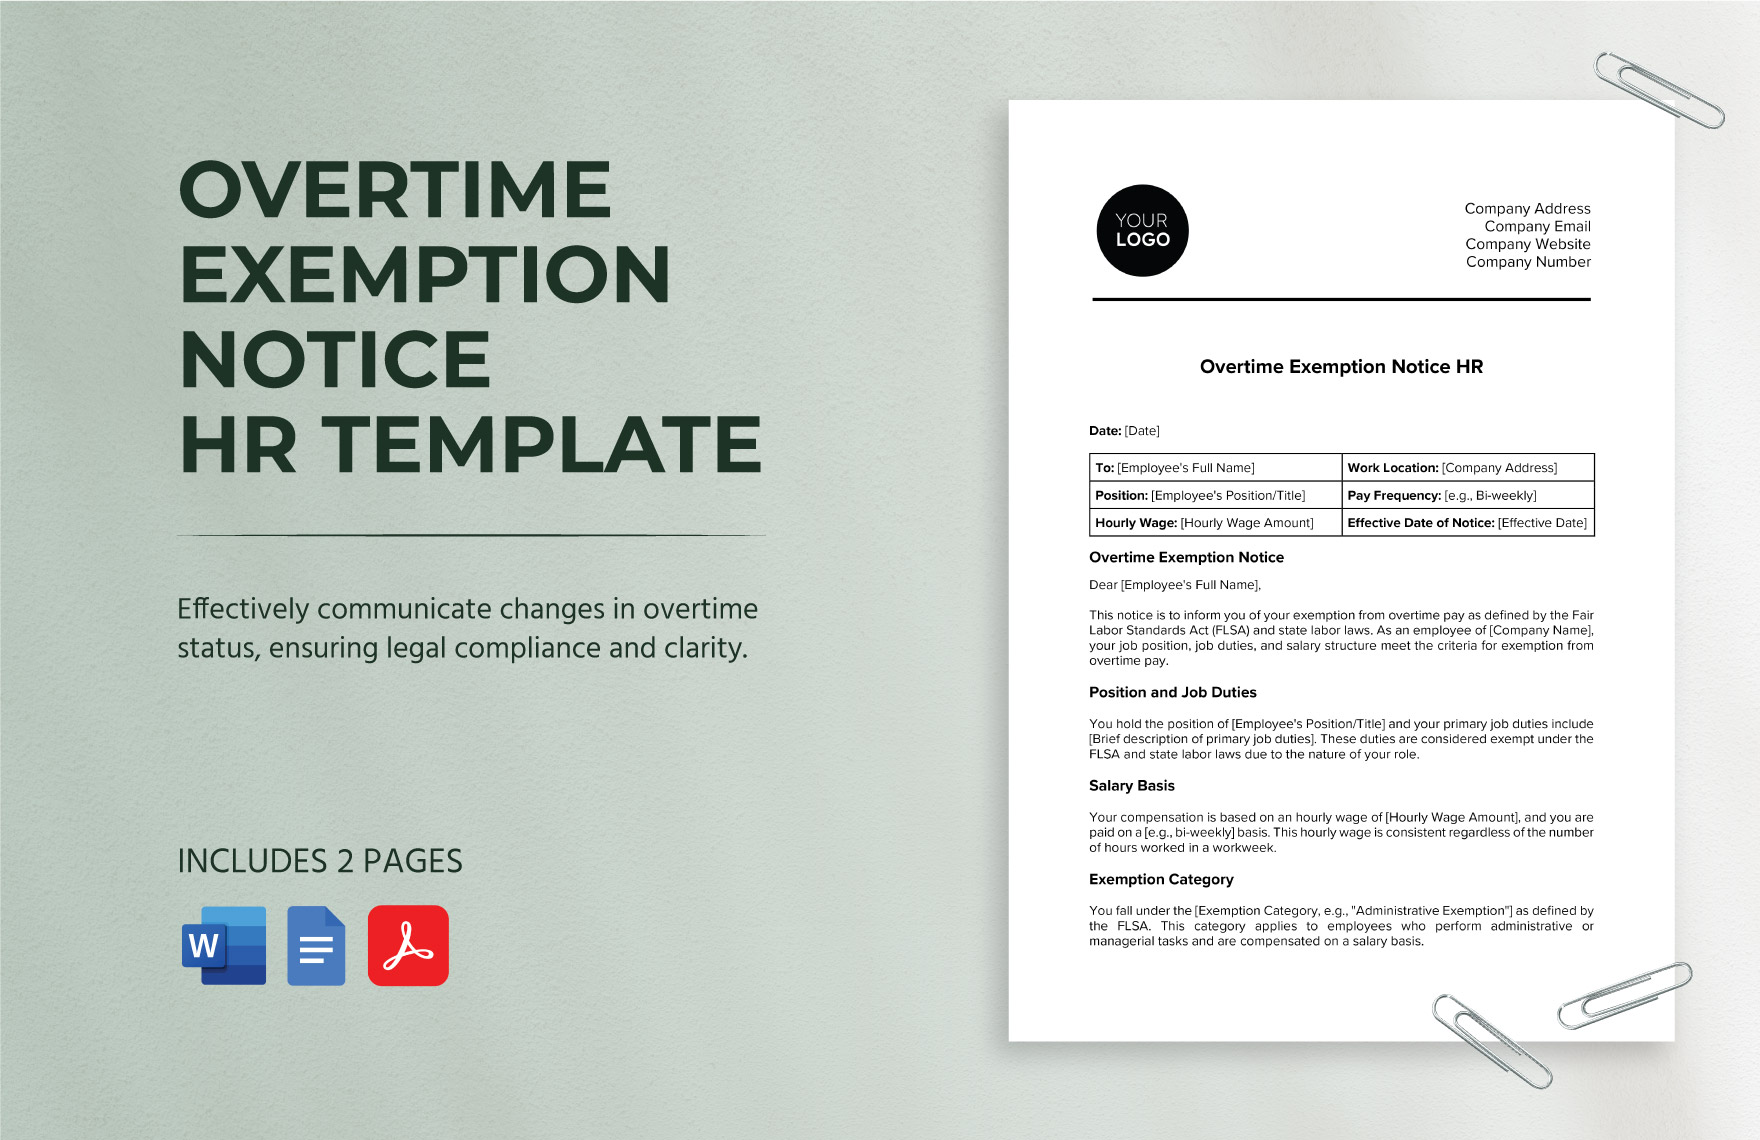 Overtime Exemption Notice HR Template in Word, Google Docs, PDF